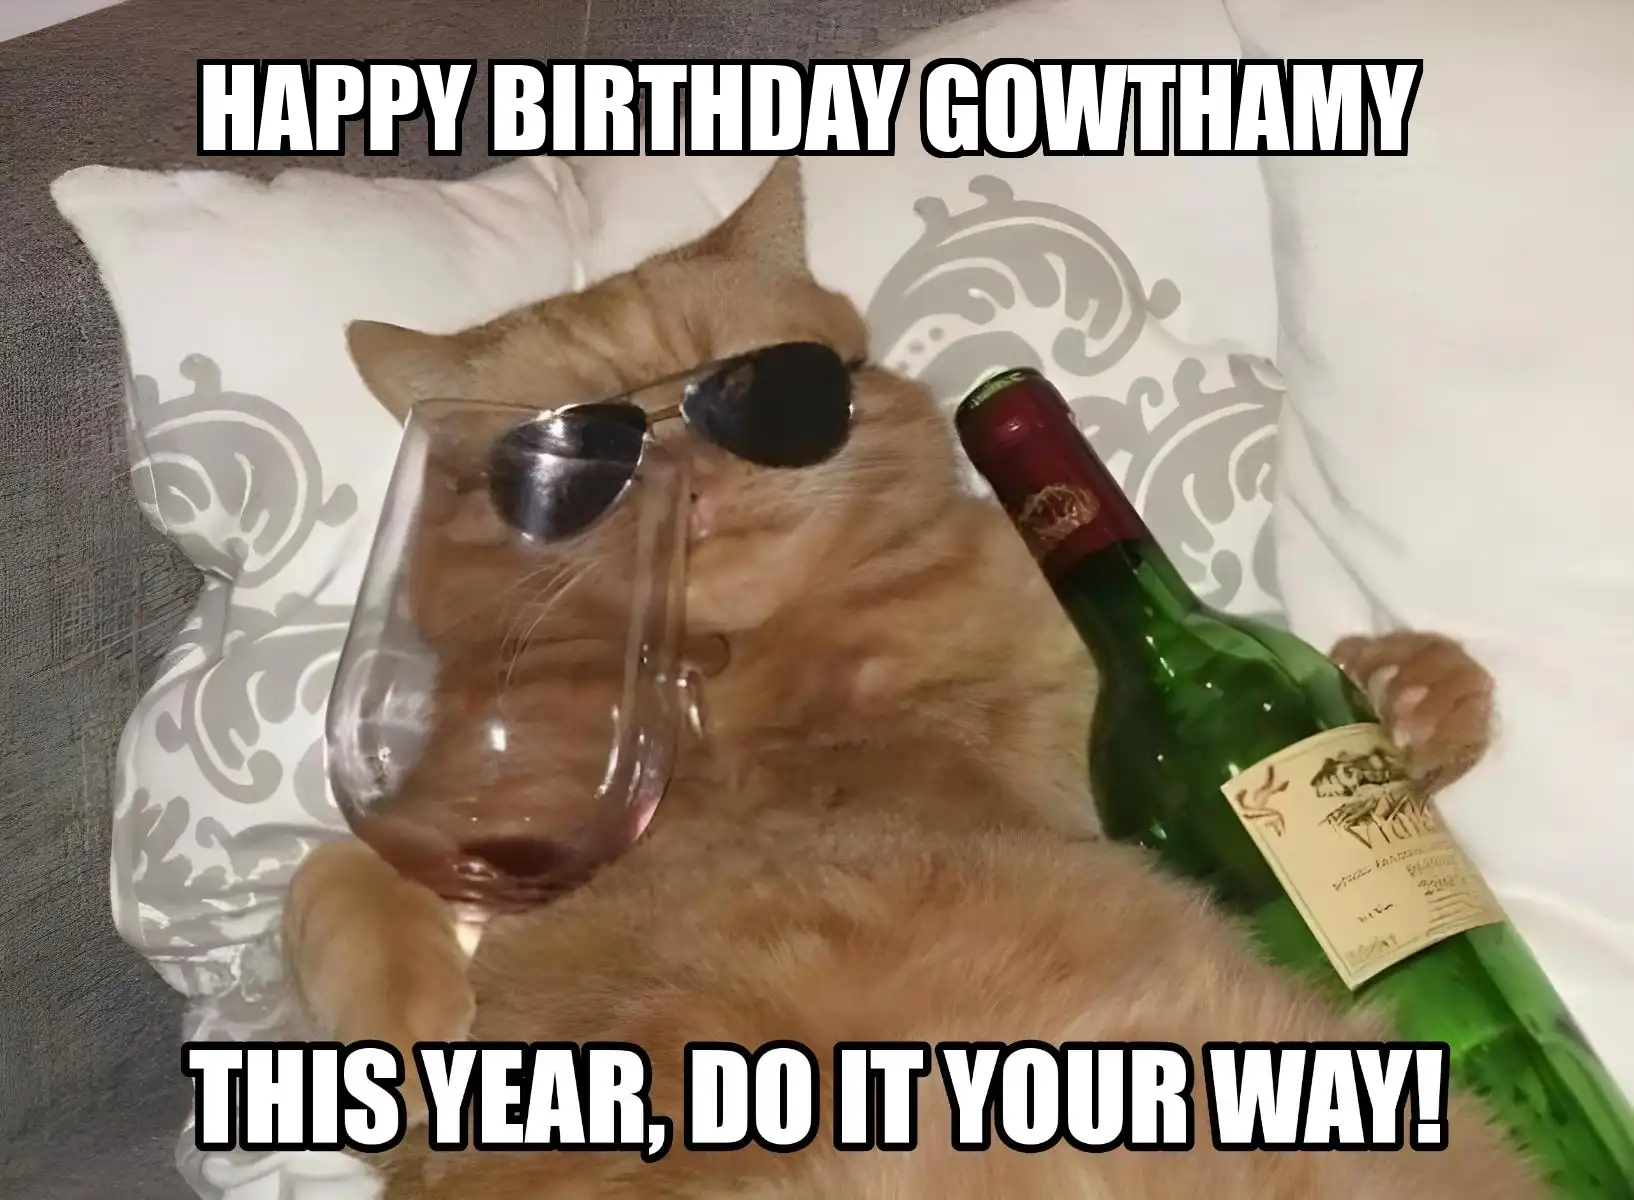 Happy Birthday Gowthamy This Year Do It Your Way Meme